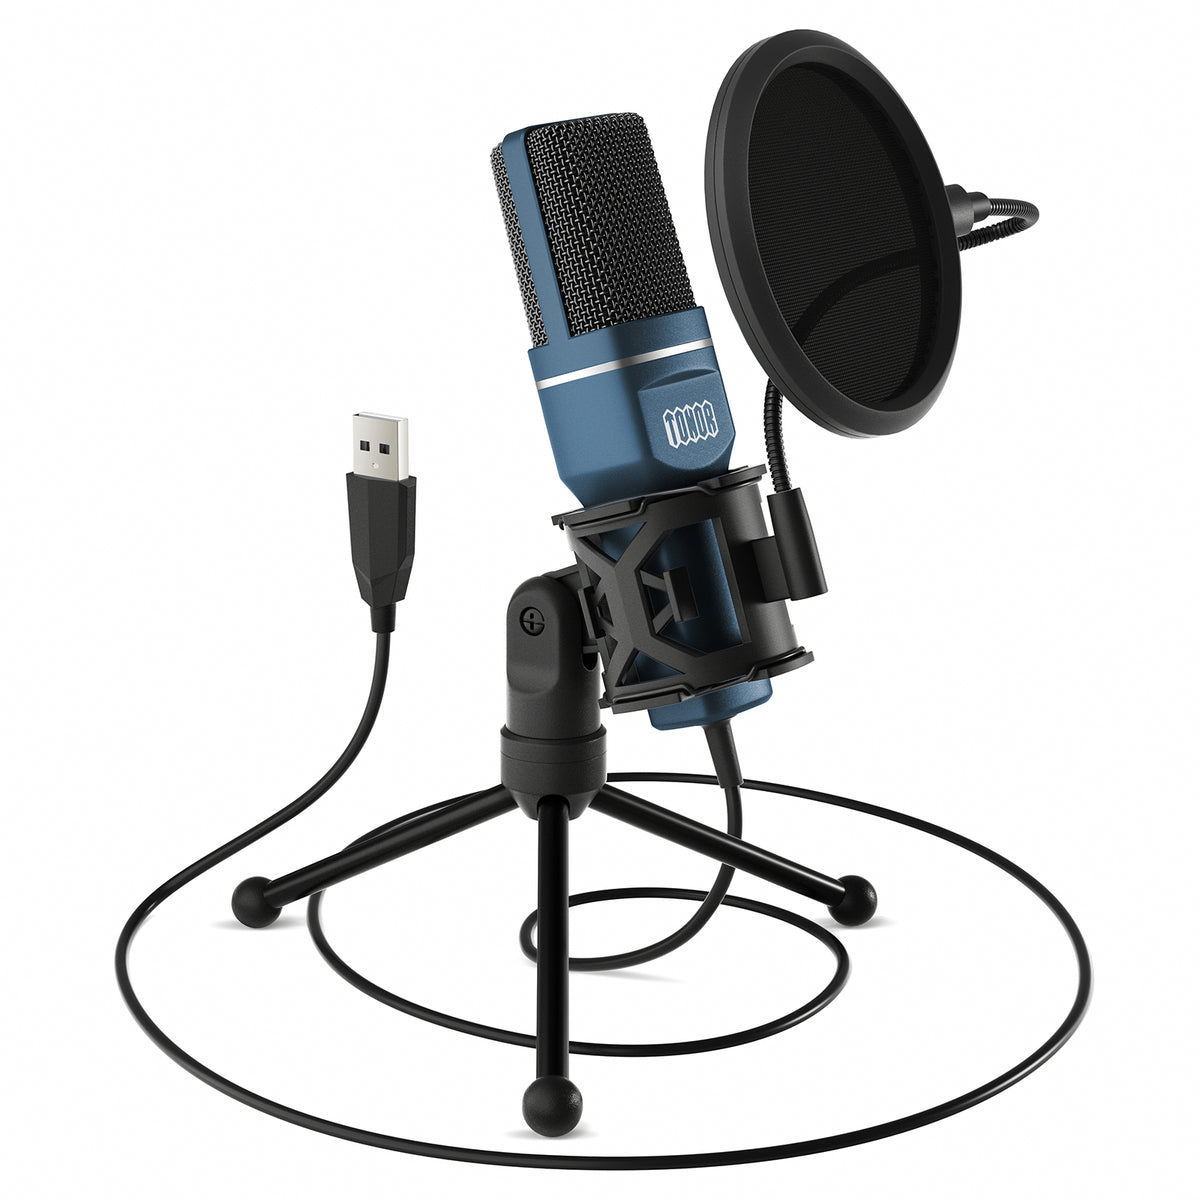 USB Microphones for sale in Marseille, France